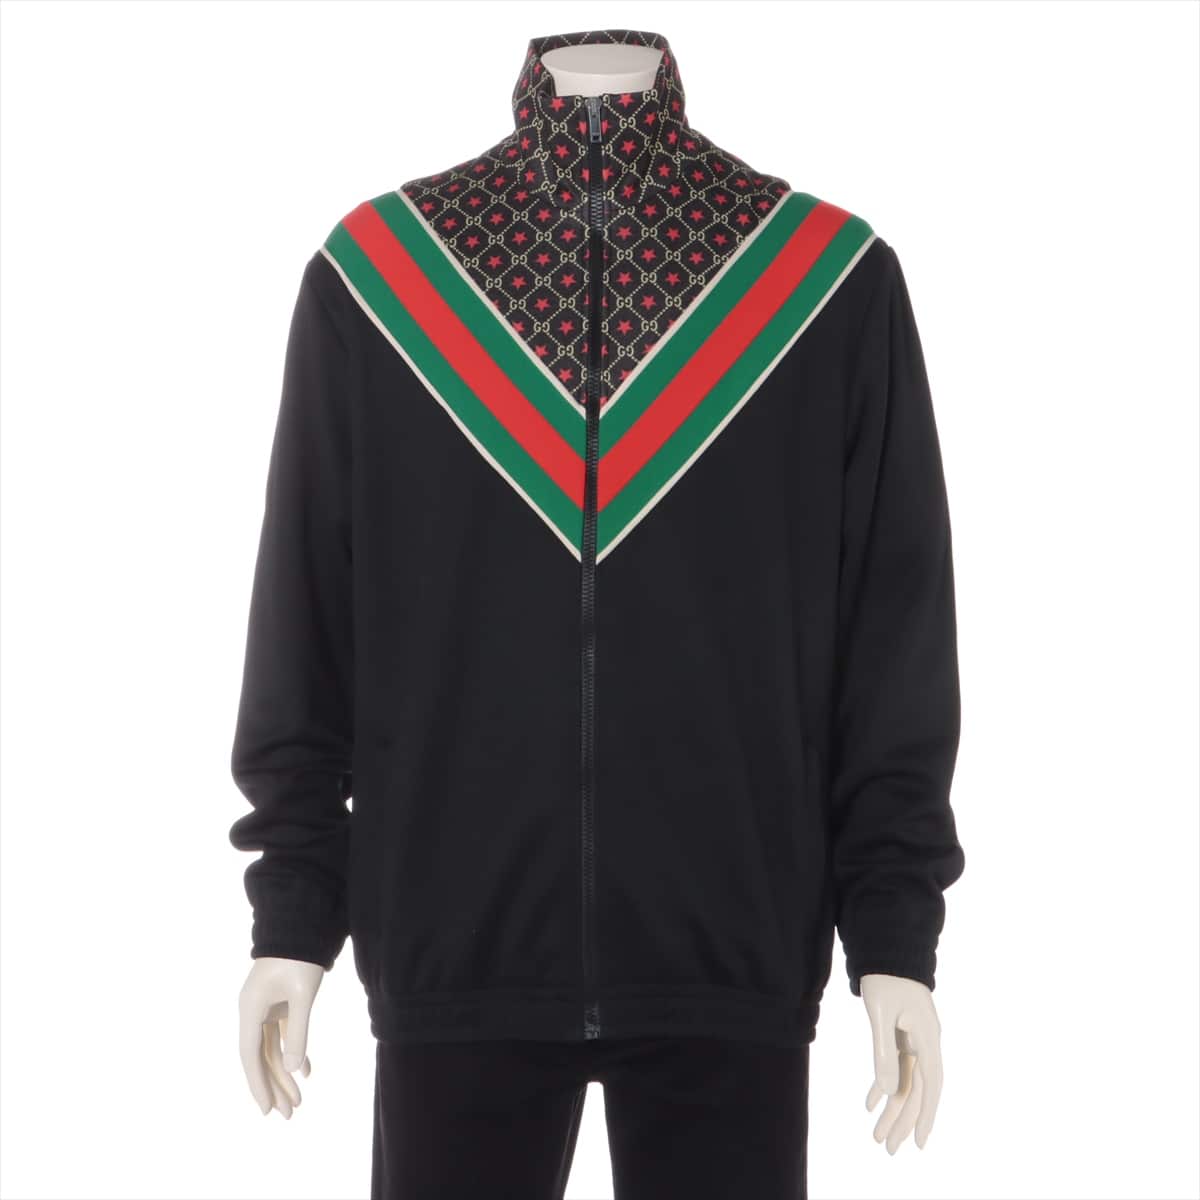 Gucci GG Star 20SS Cotton & Polyester Sweatsuit S Men's Black  575734 Sherry Line